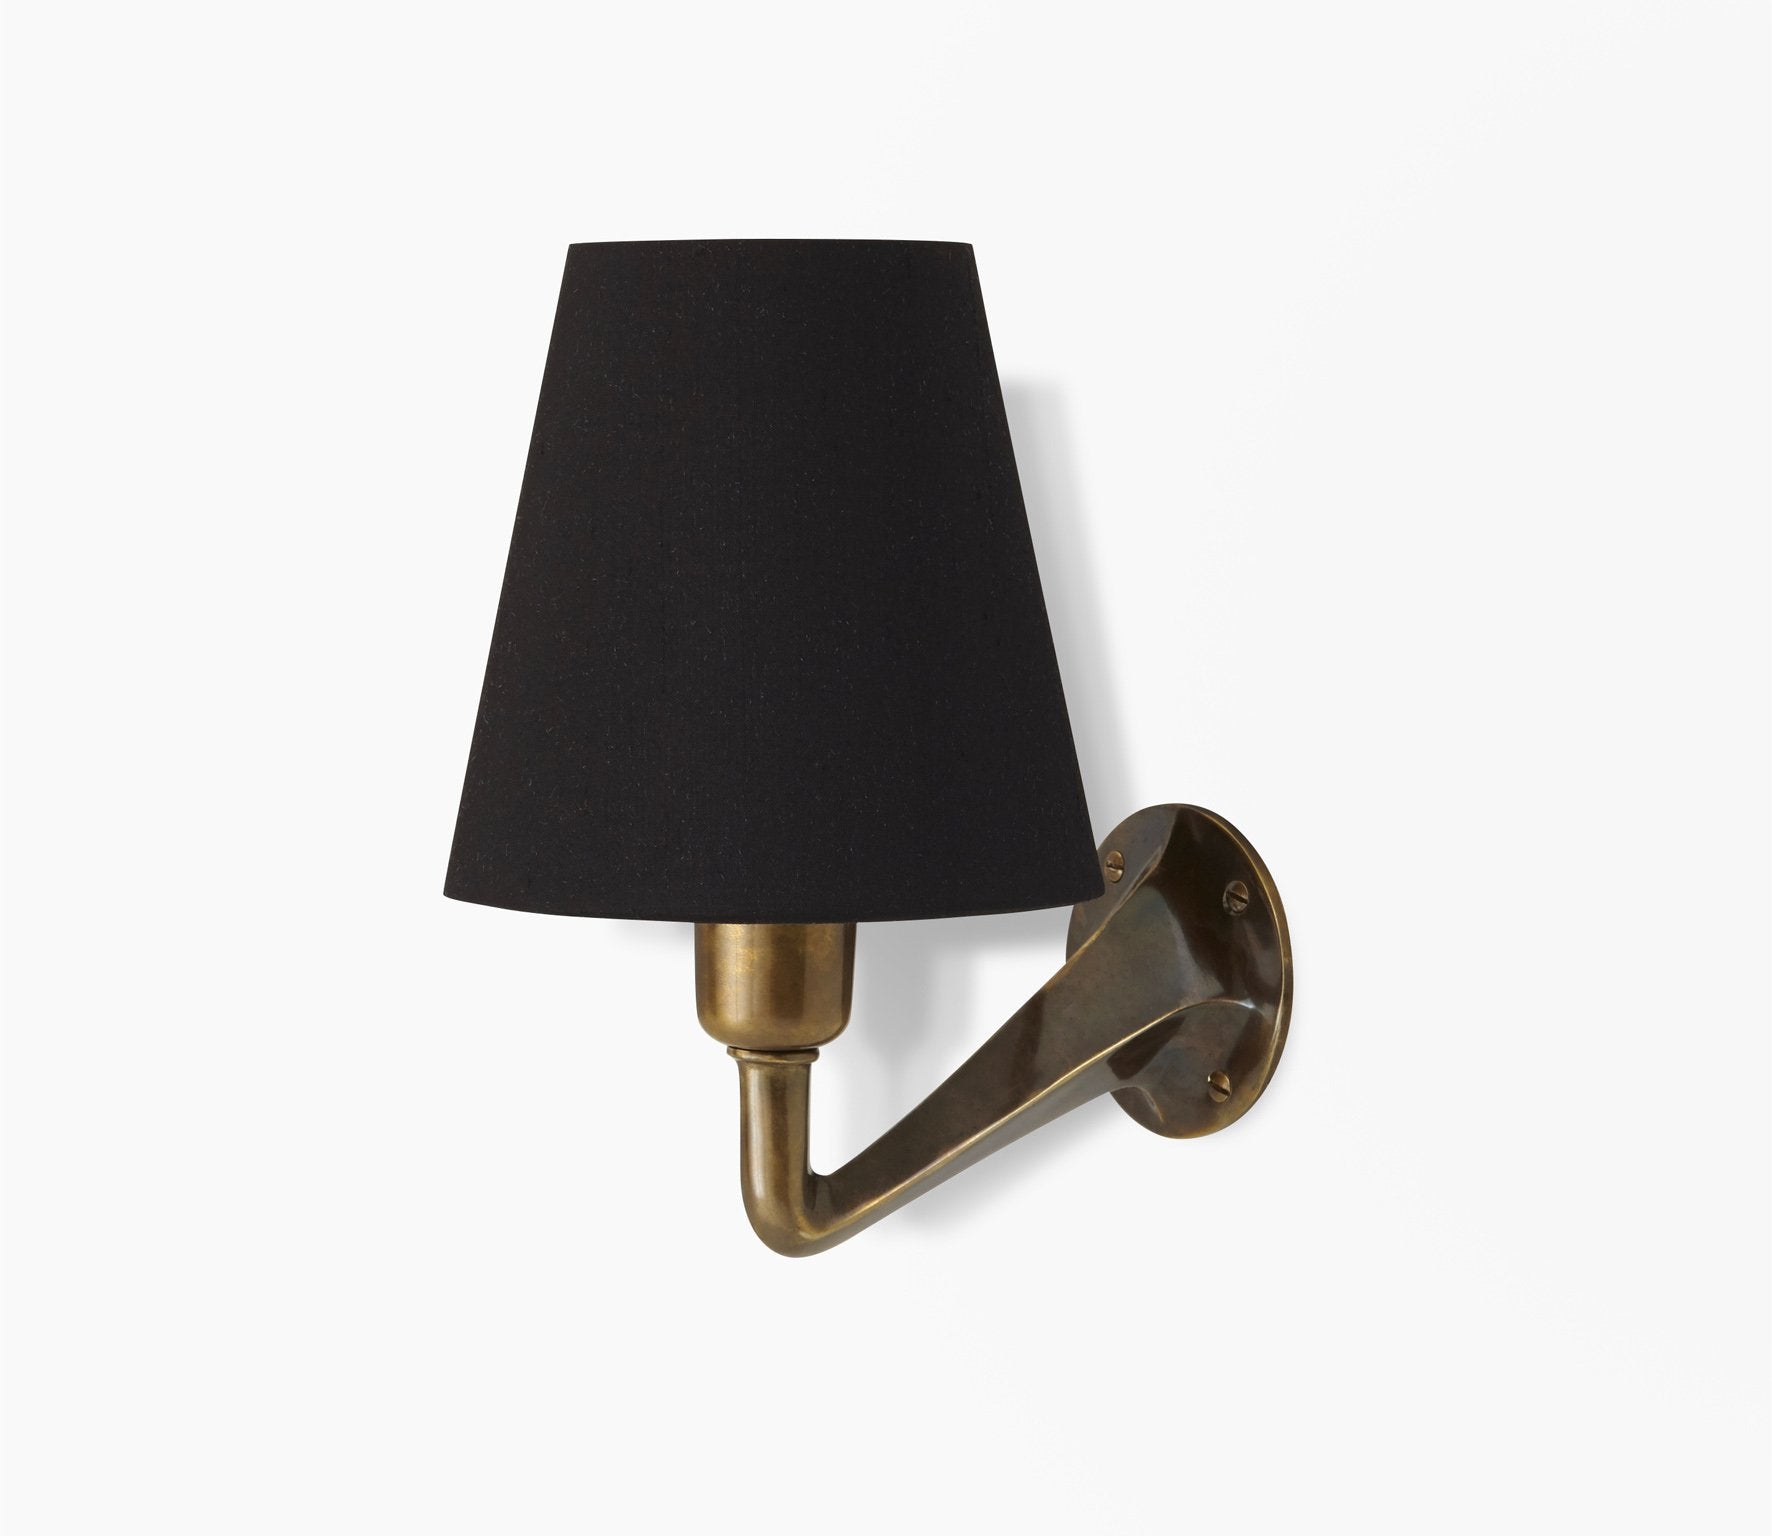 Leila Wall Light with Plain Empire Shade Product Image 2